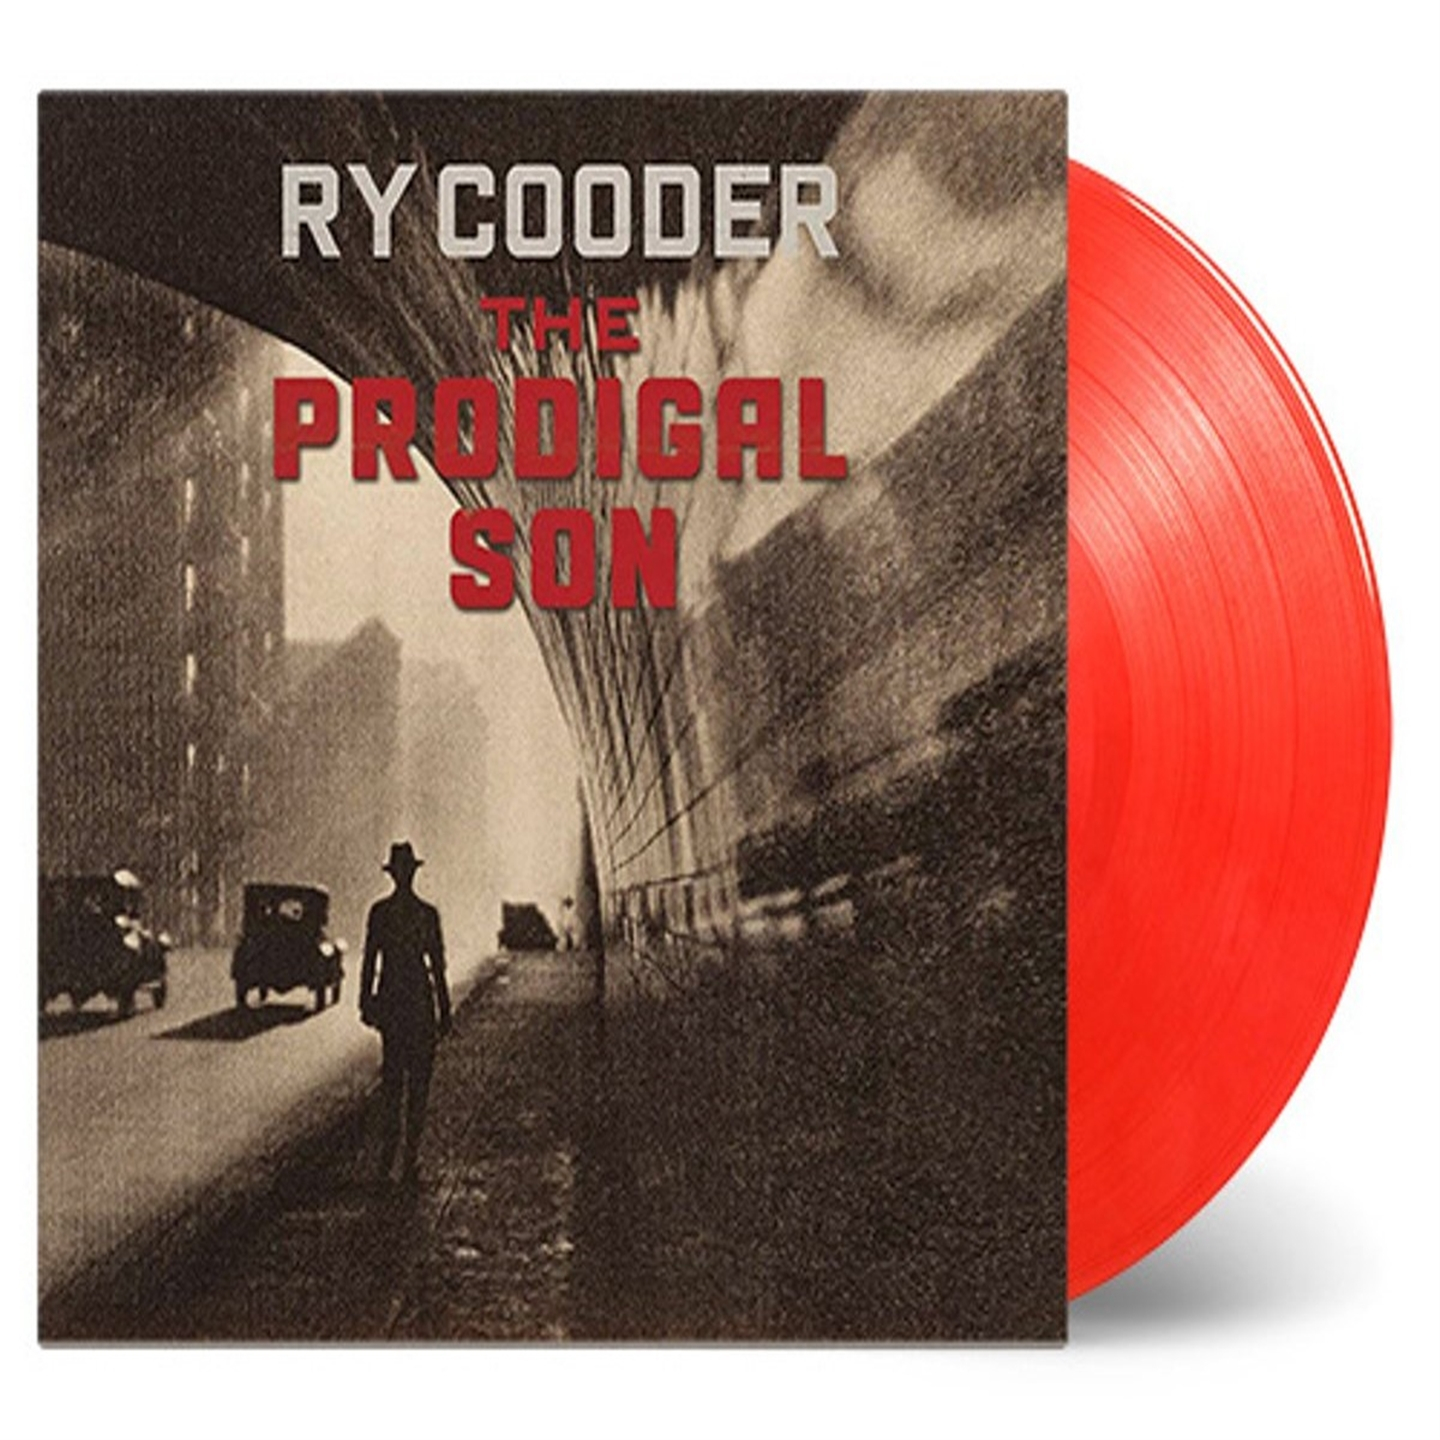 Ry Cooder - The Prodigal Son [Ltd.Ed. Colored Red Vinyl] - Foto 1 di 1